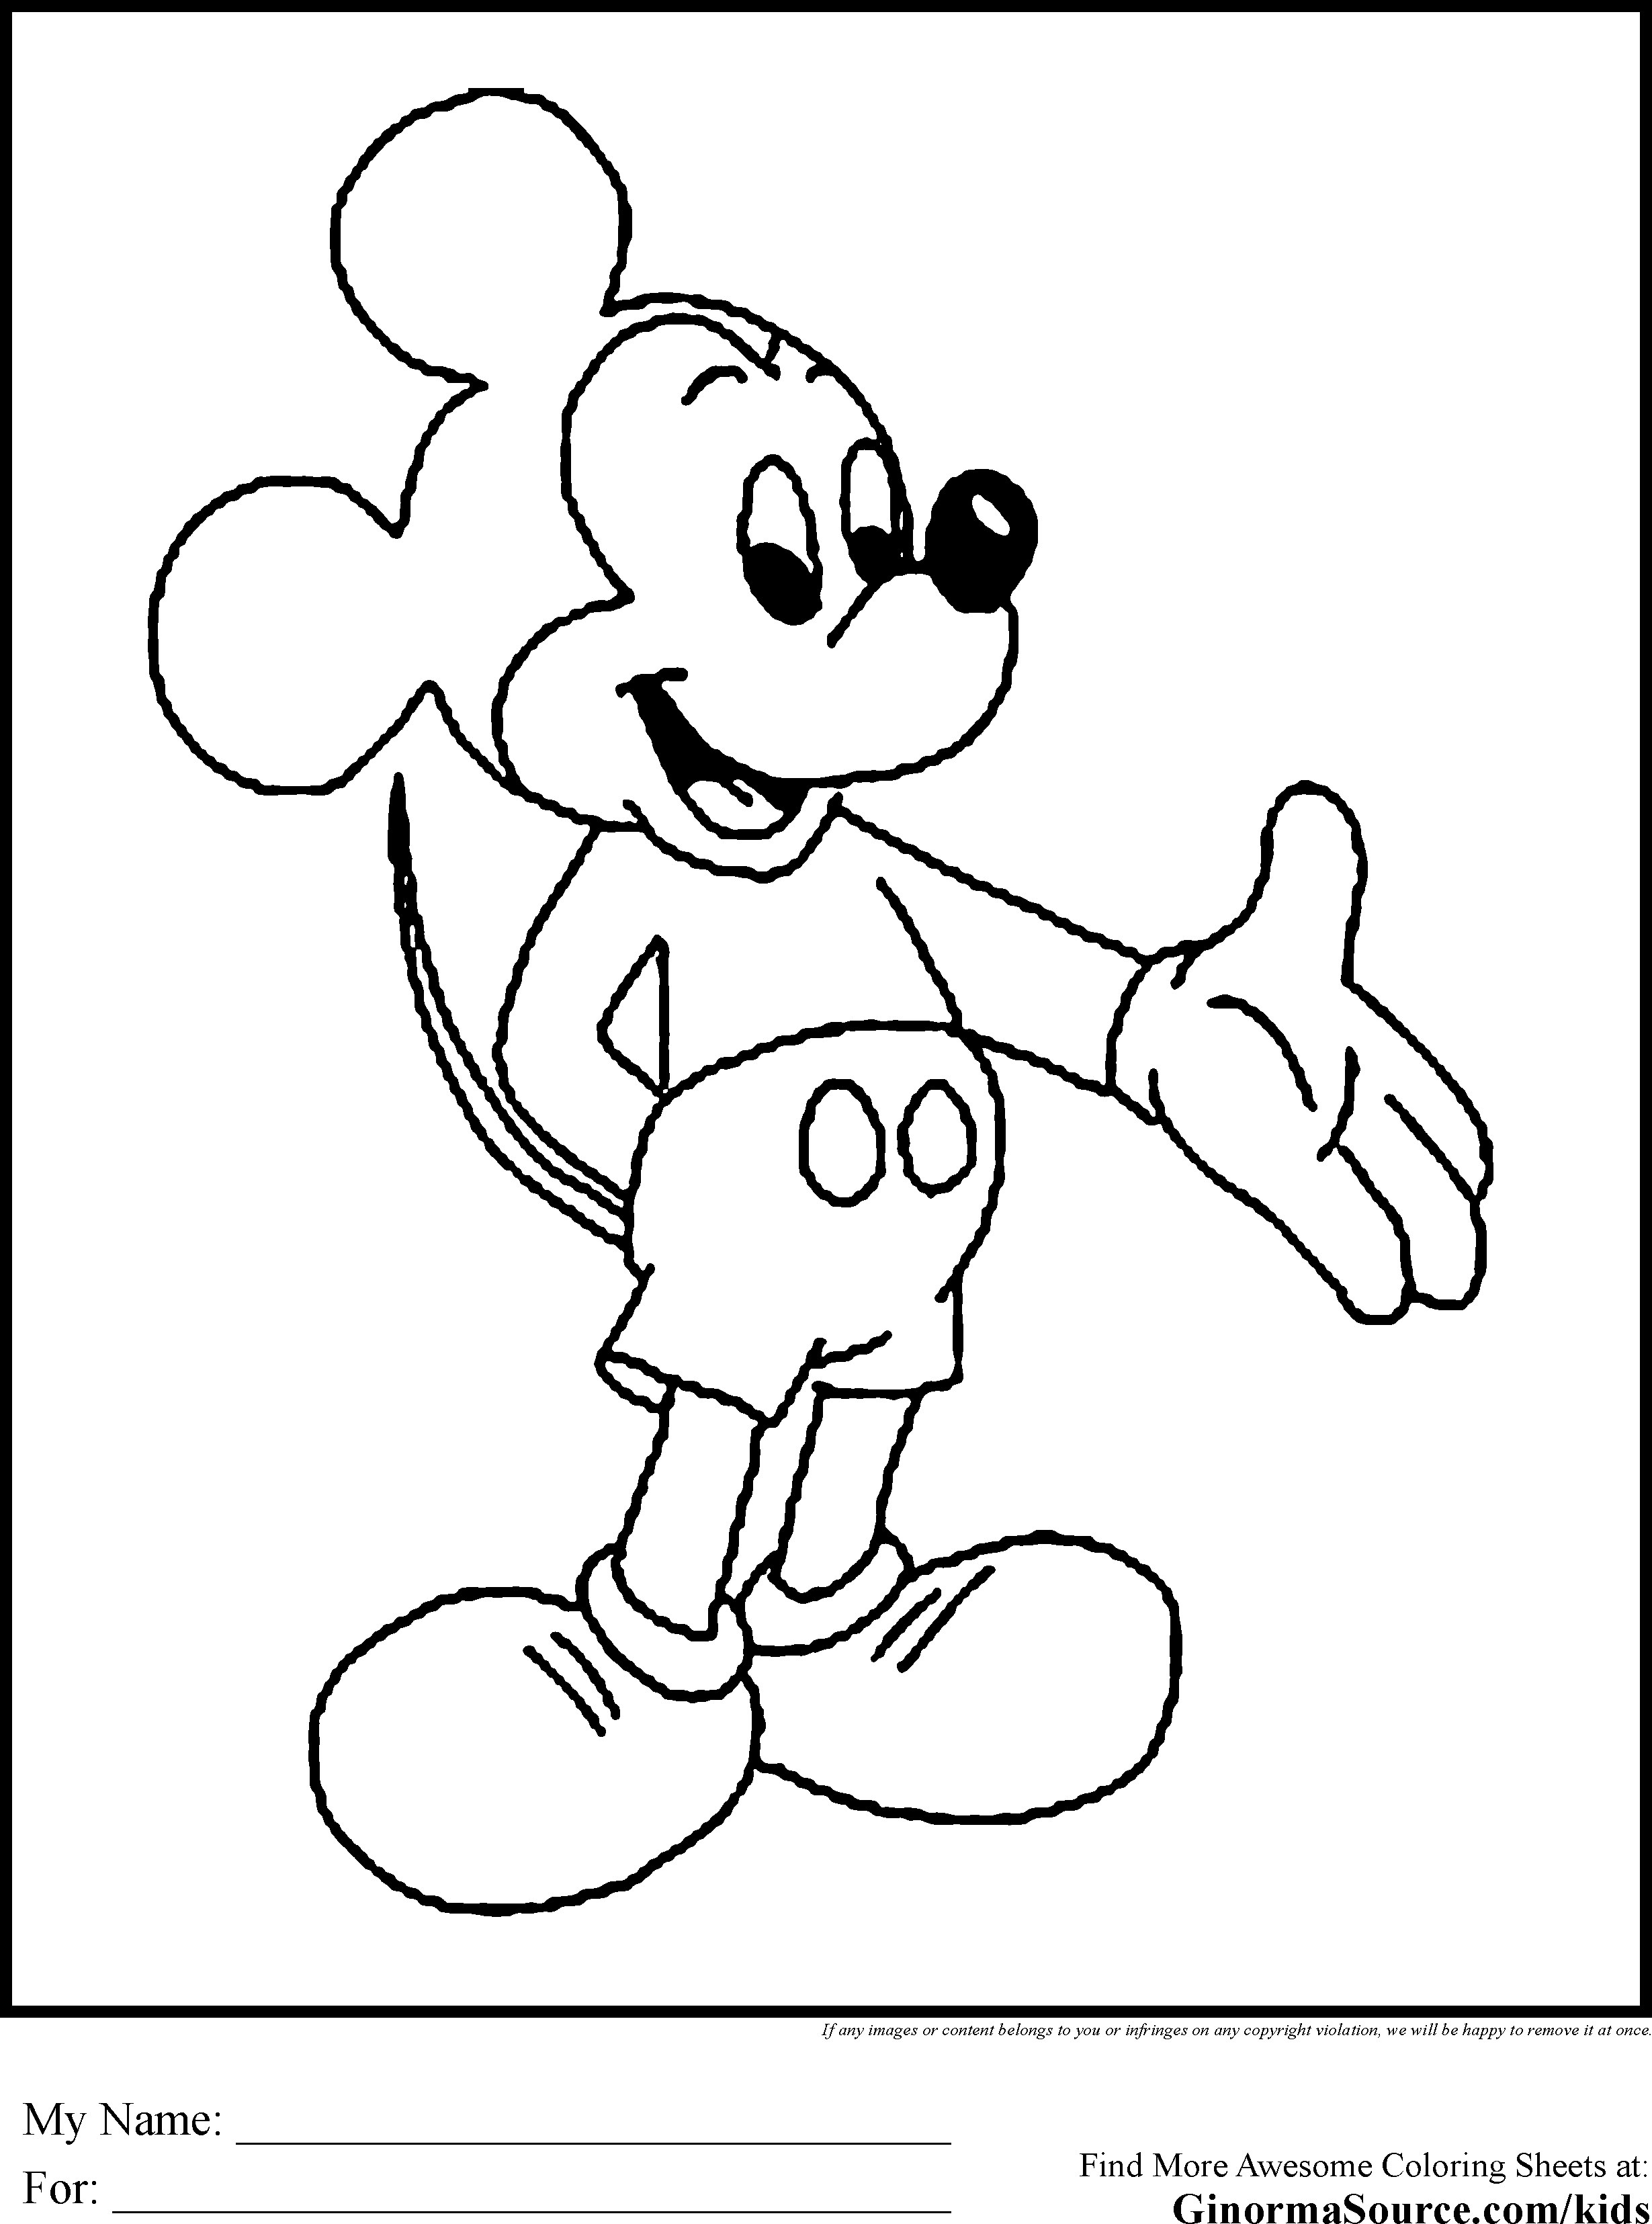 mouse-outline-drawing-at-getdrawings-free-download